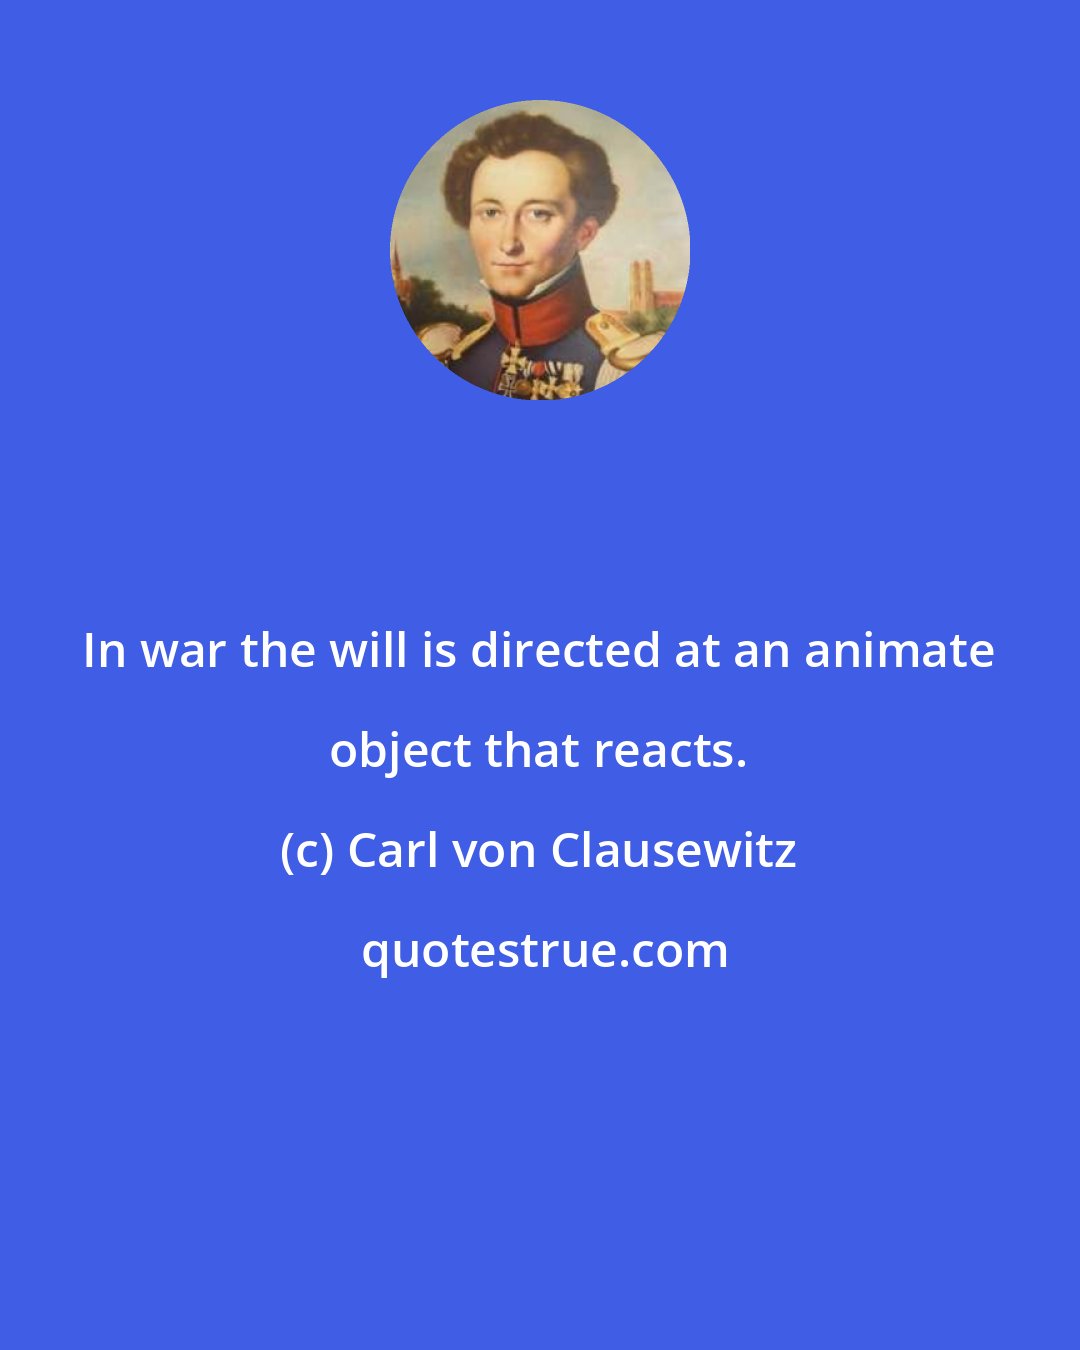 Carl von Clausewitz: In war the will is directed at an animate object that reacts.